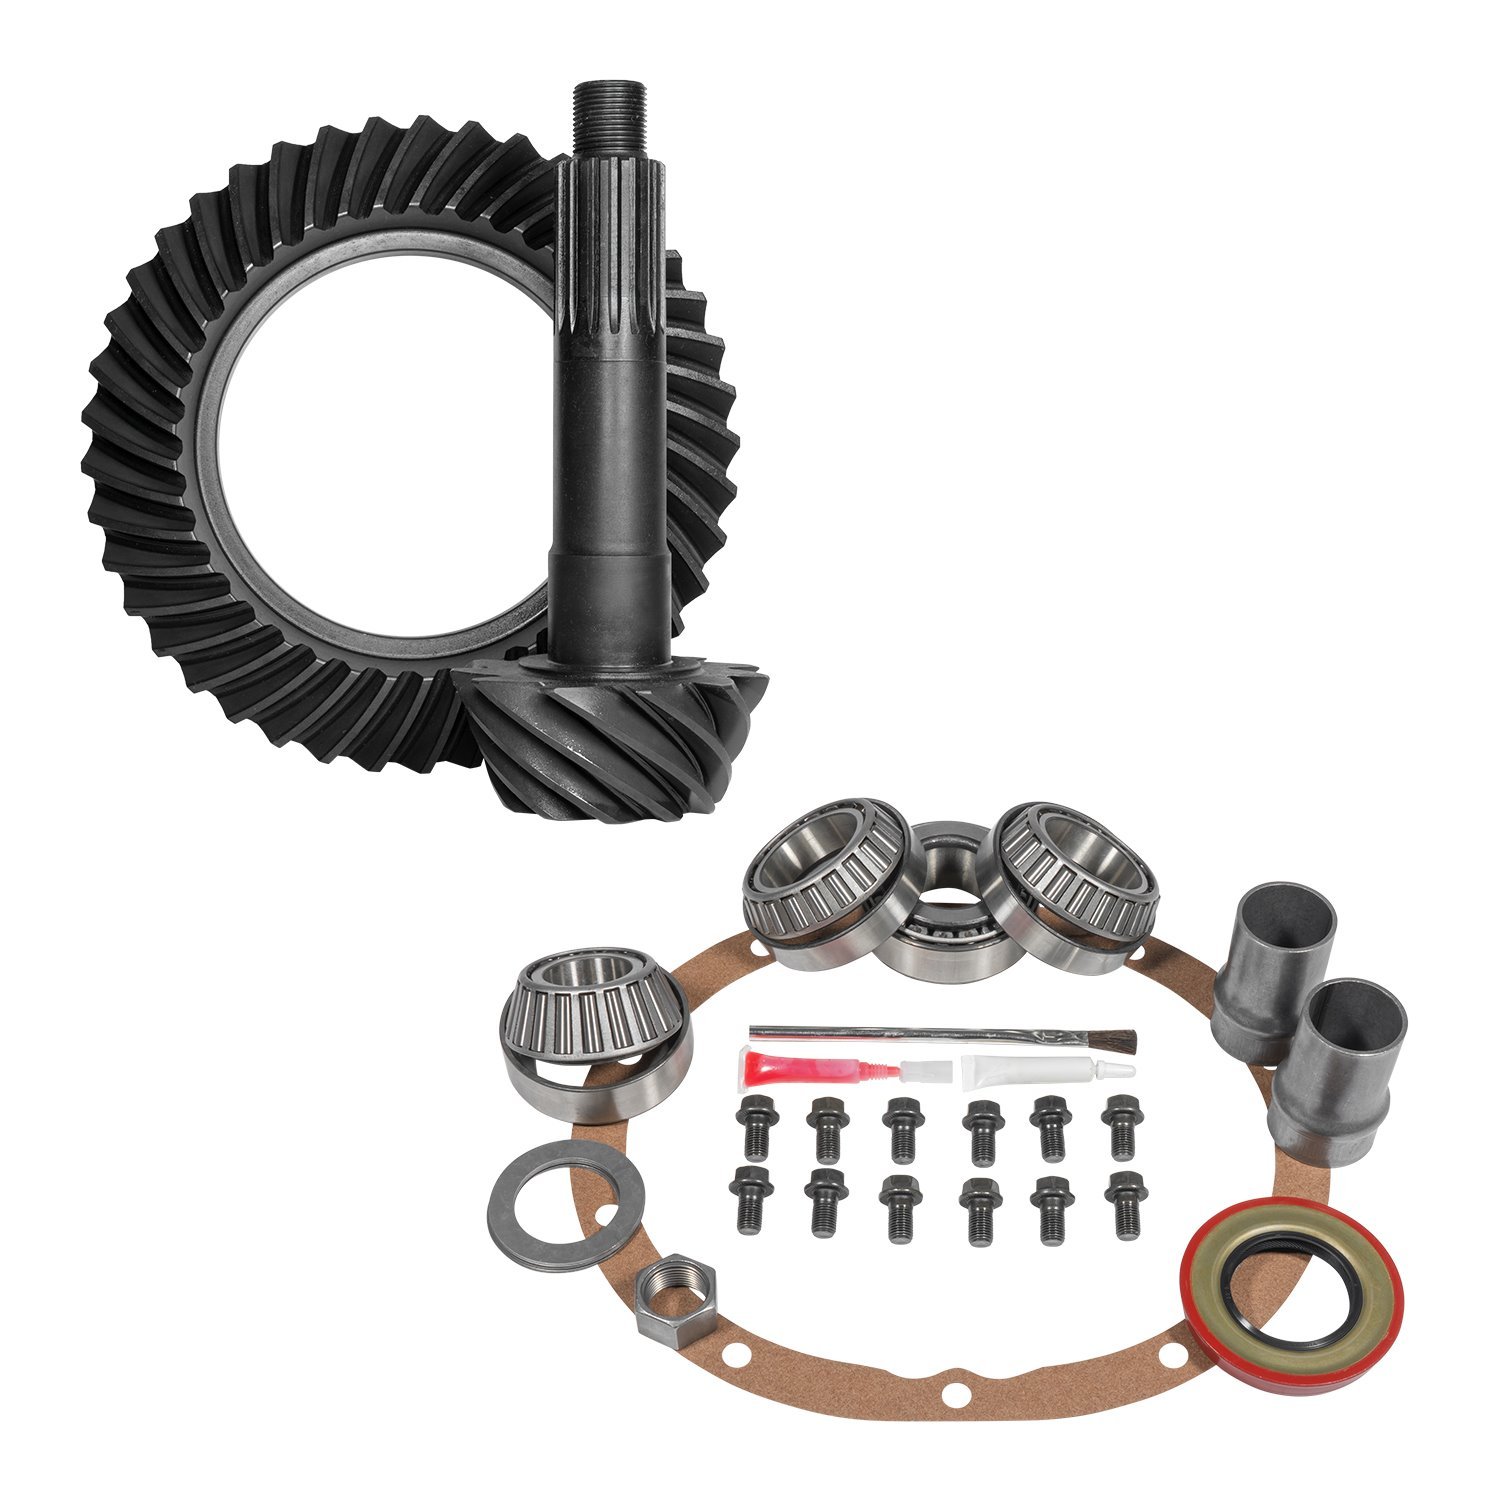 Muscle Car Re-Gear Kit For GM 55P Differential, 17 Spline, 4.11 Ratio